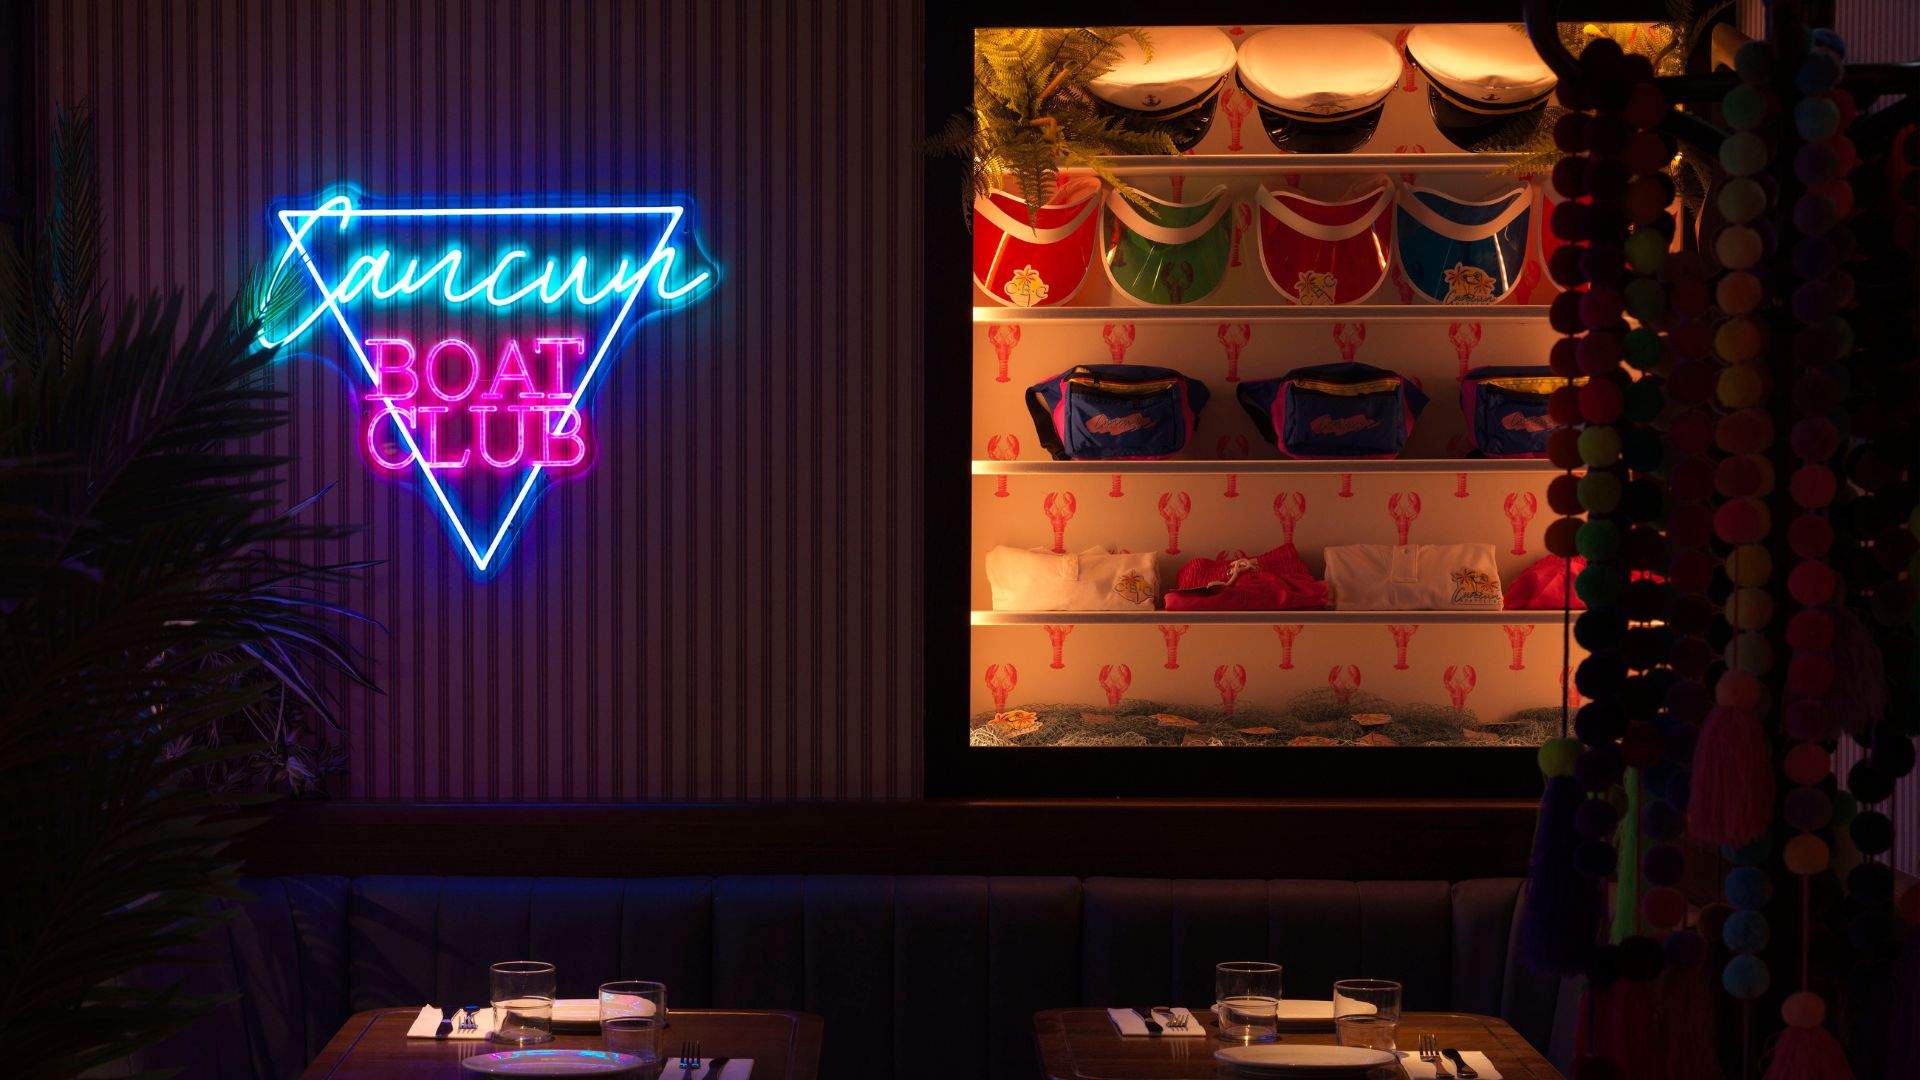 Now Open: Cancun Boat Club Is Quay Quarter's New Mexican Eatery and Margarita Bar That's Taking Cues From the 80s